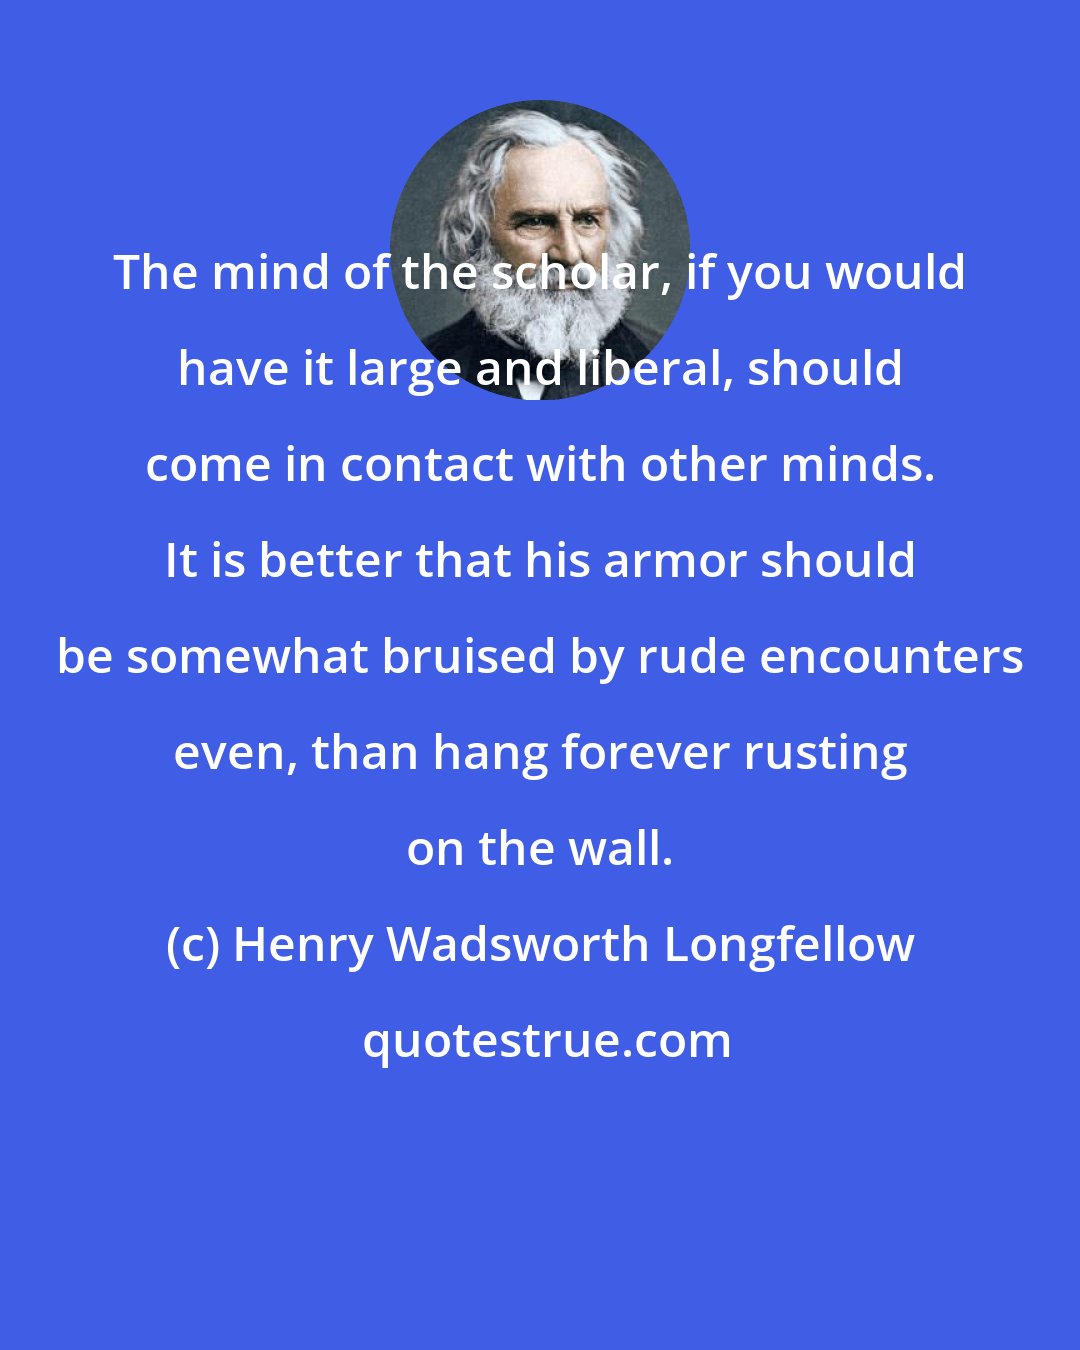 Henry Wadsworth Longfellow: The mind of the scholar, if you would have it large and liberal, should come in contact with other minds. It is better that his armor should be somewhat bruised by rude encounters even, than hang forever rusting on the wall.